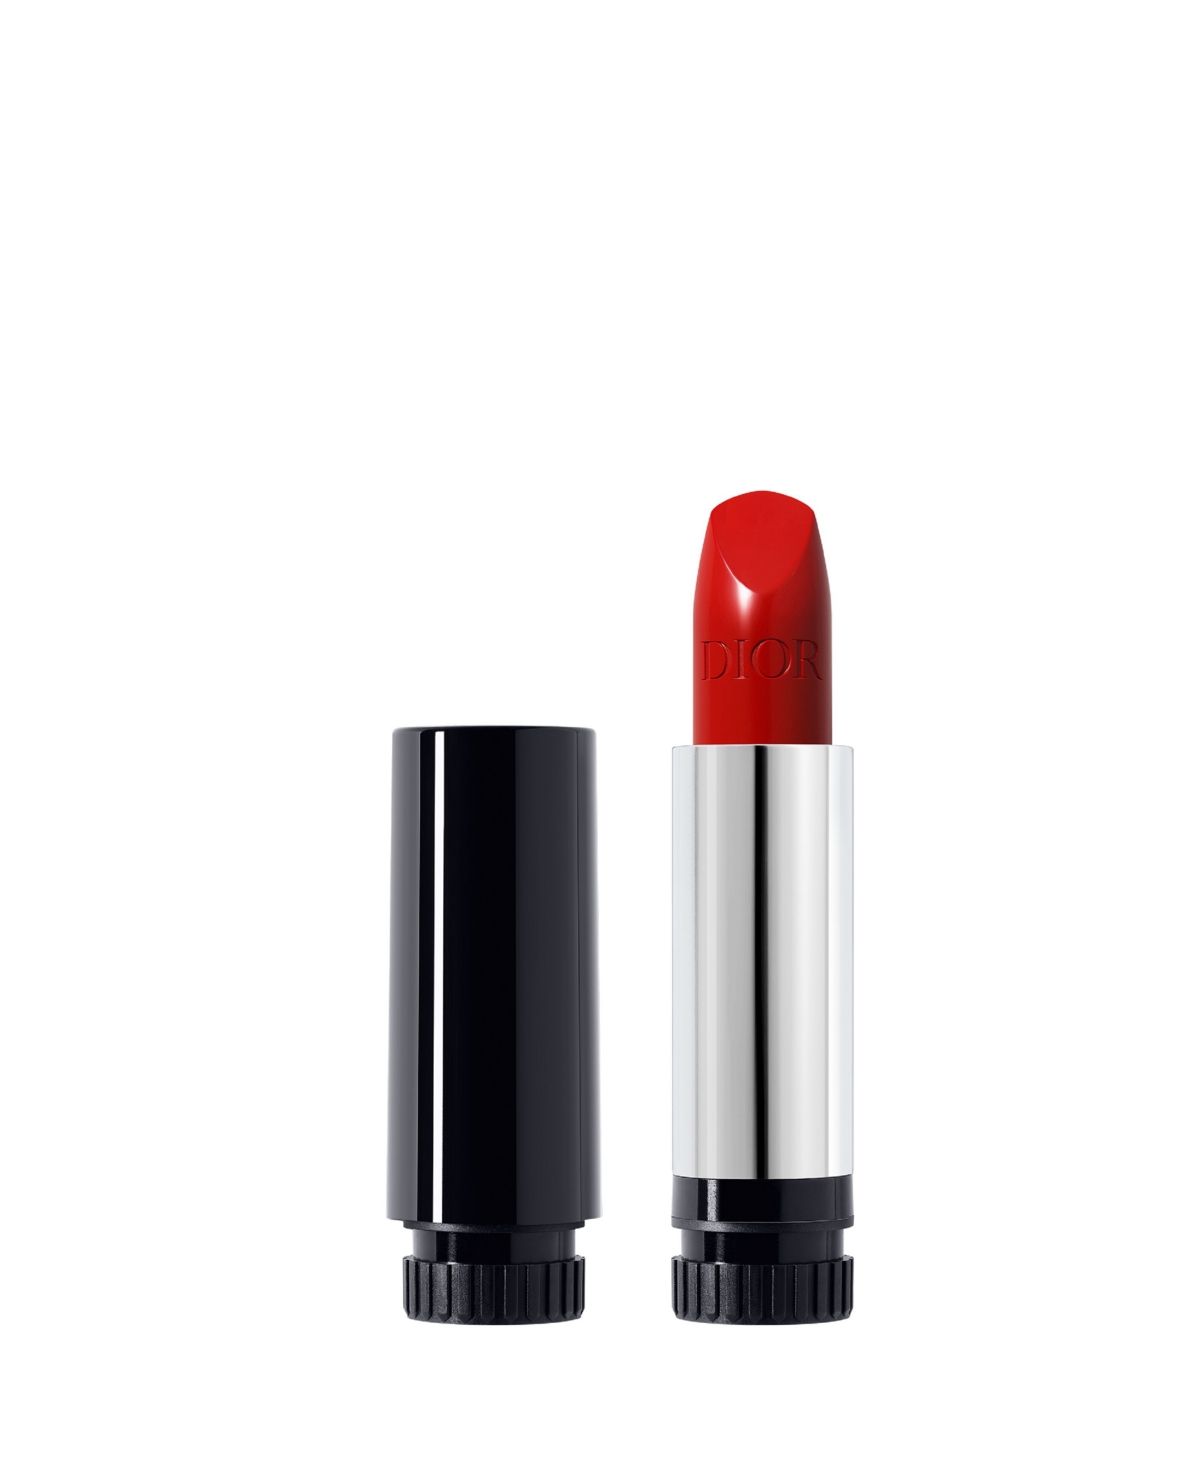 Dior Rouge  Lipstick Refill In - The Iconic Red